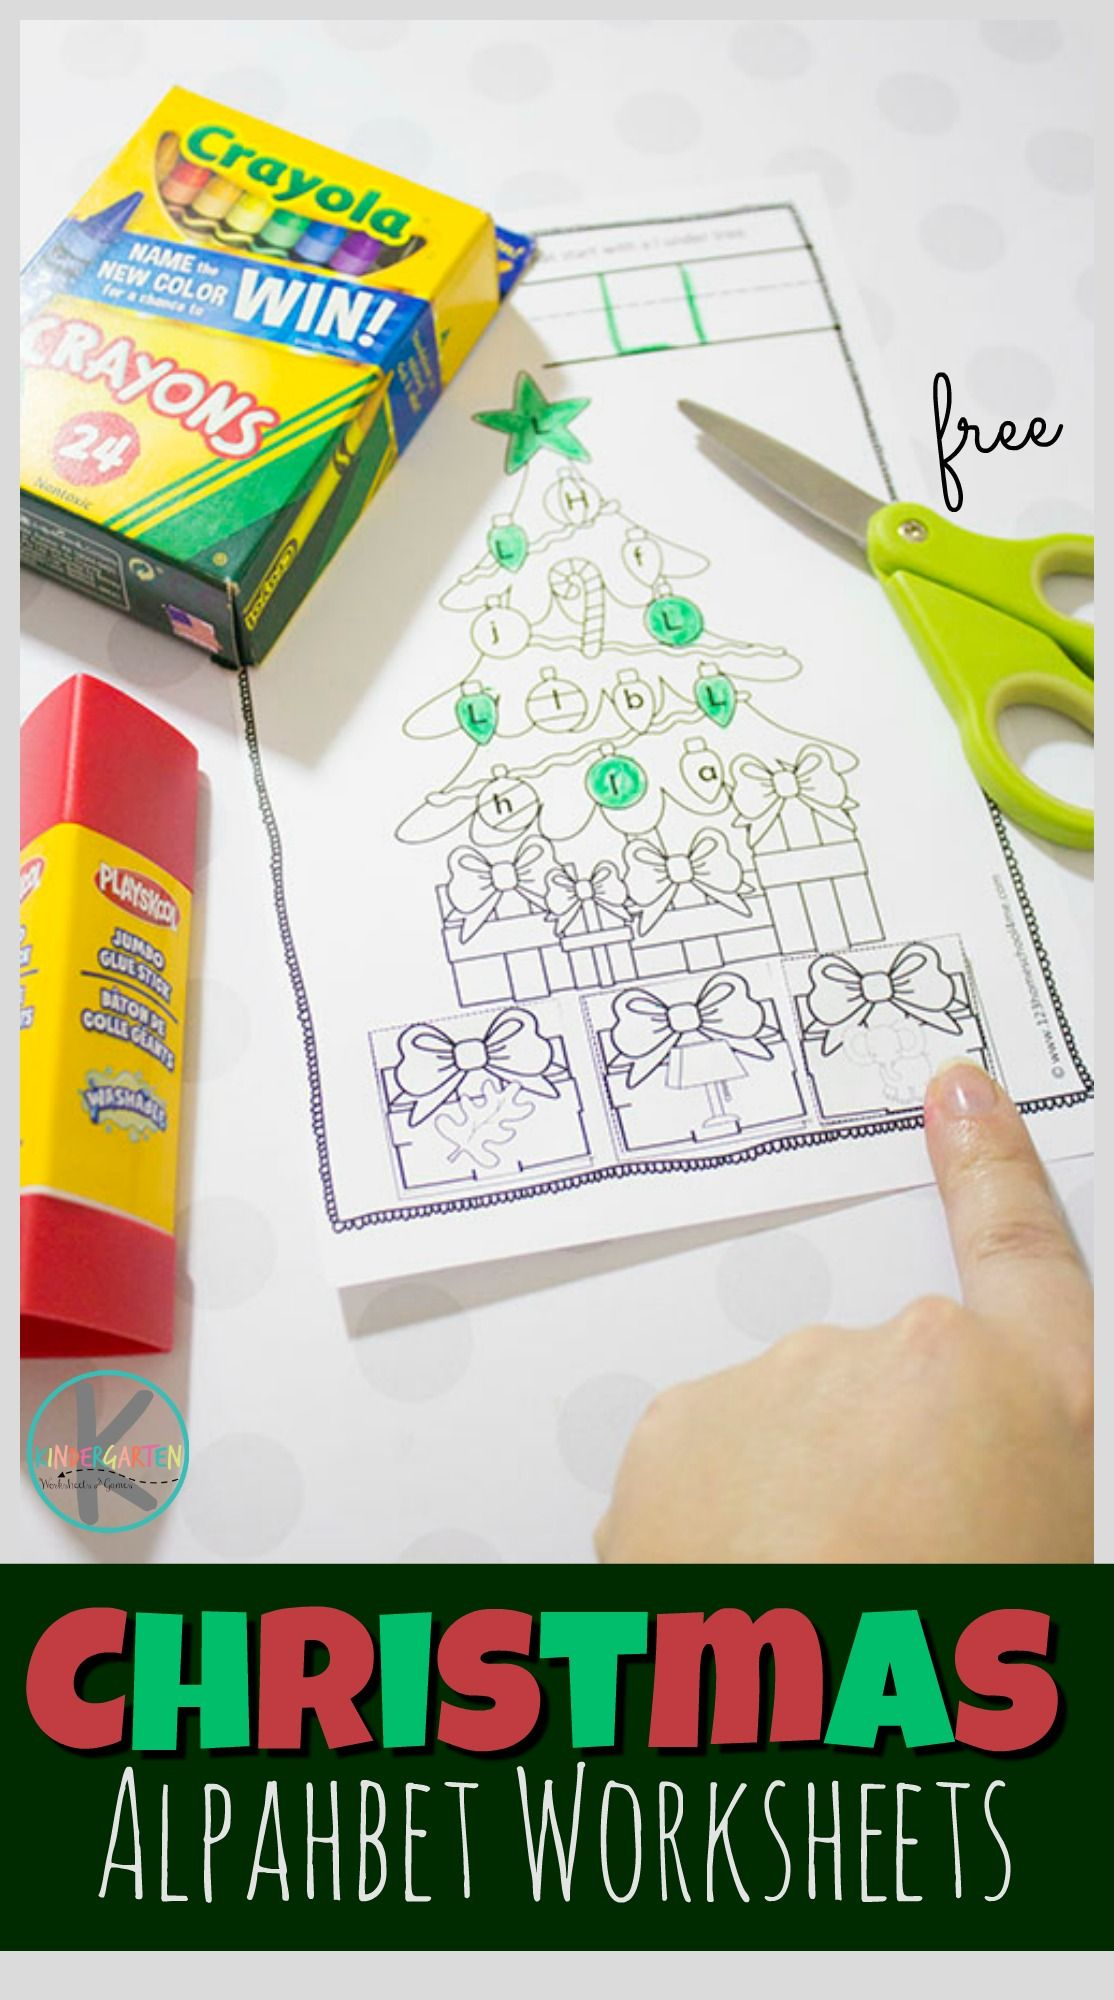 Free Christmas Alphabet Worksheets Are Such A Fun, Low Prep